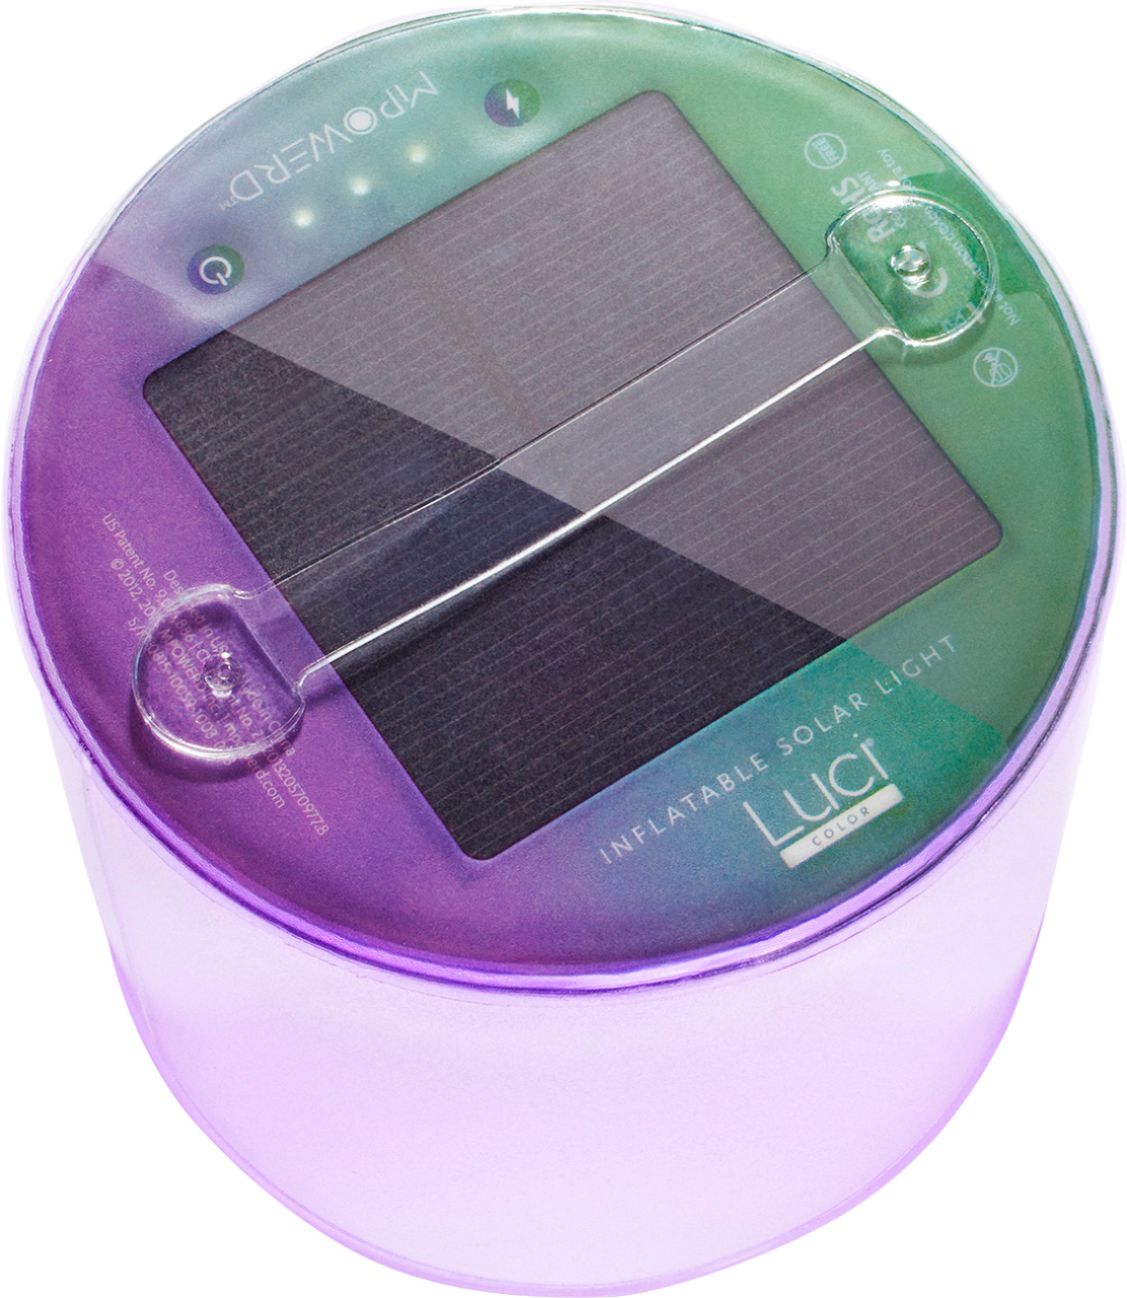 Customer Reviews Mpowerd Luci Color Inflatable Solar Light 1003 005 001 002 Best Buy